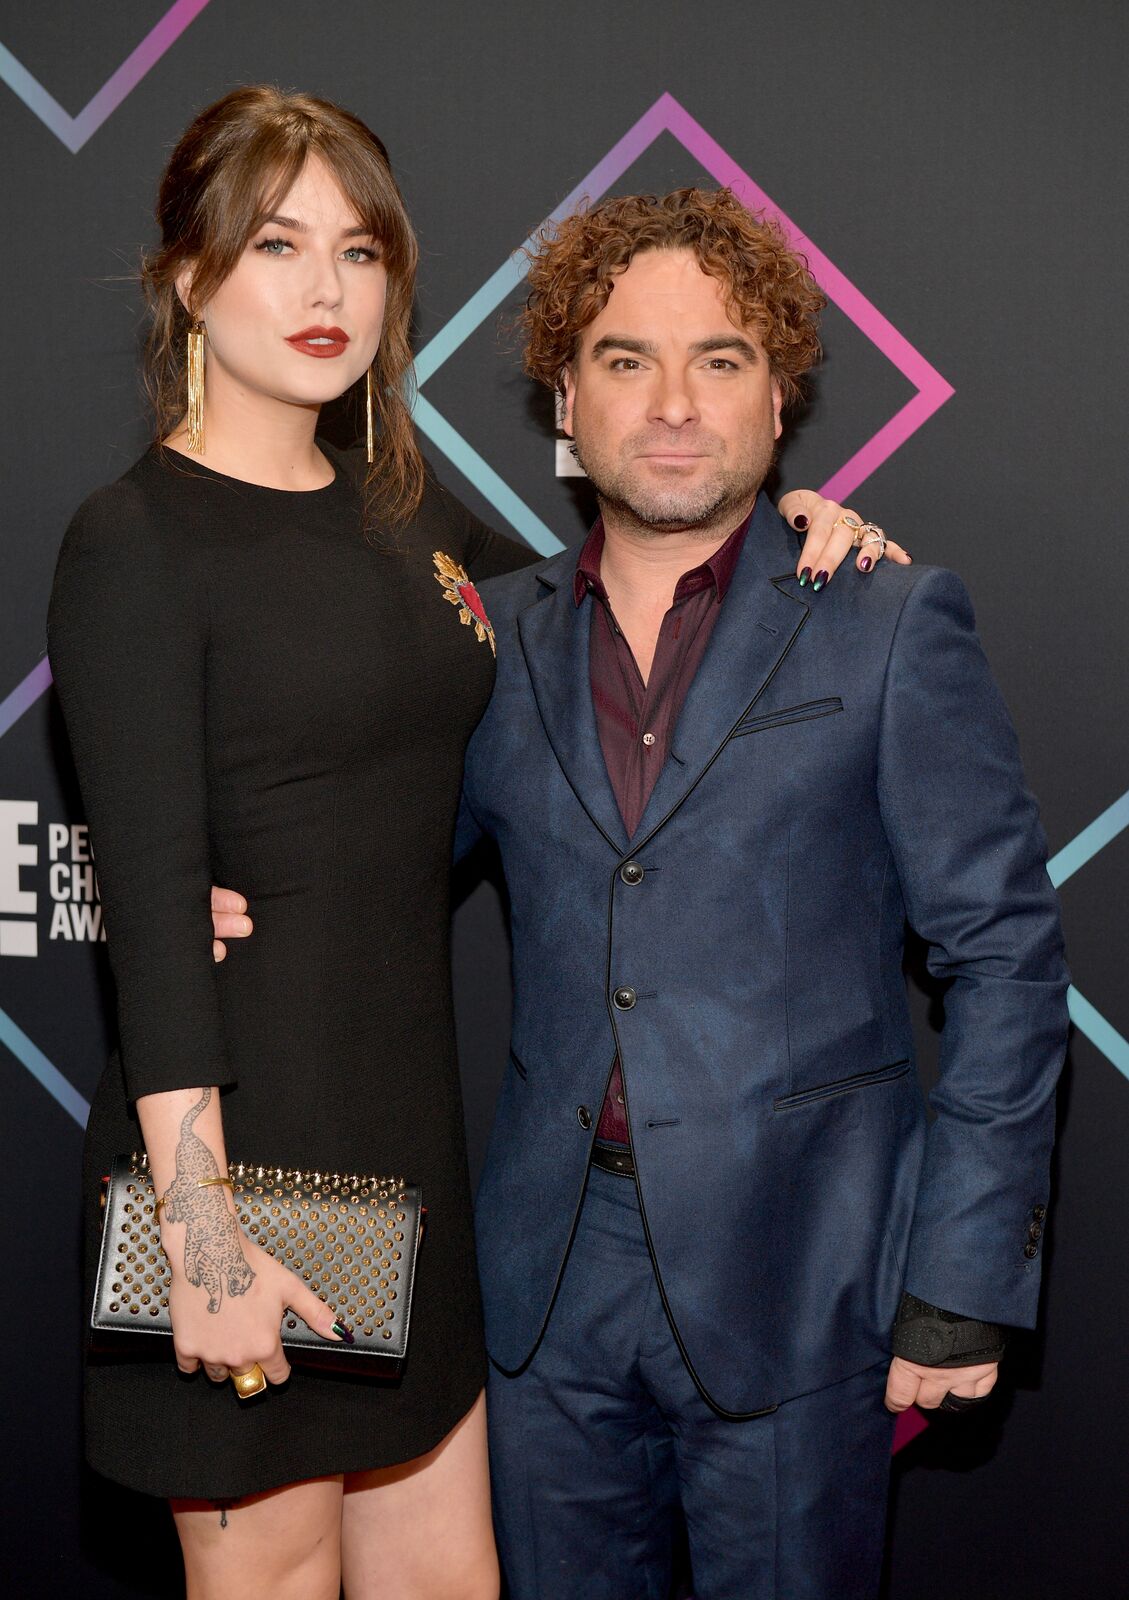 Johnny Galecki and Alaina Meyer attend the People's Choice Awards 2018 at Barker Hangar on November 11, 2018. | Photo: Getty Images